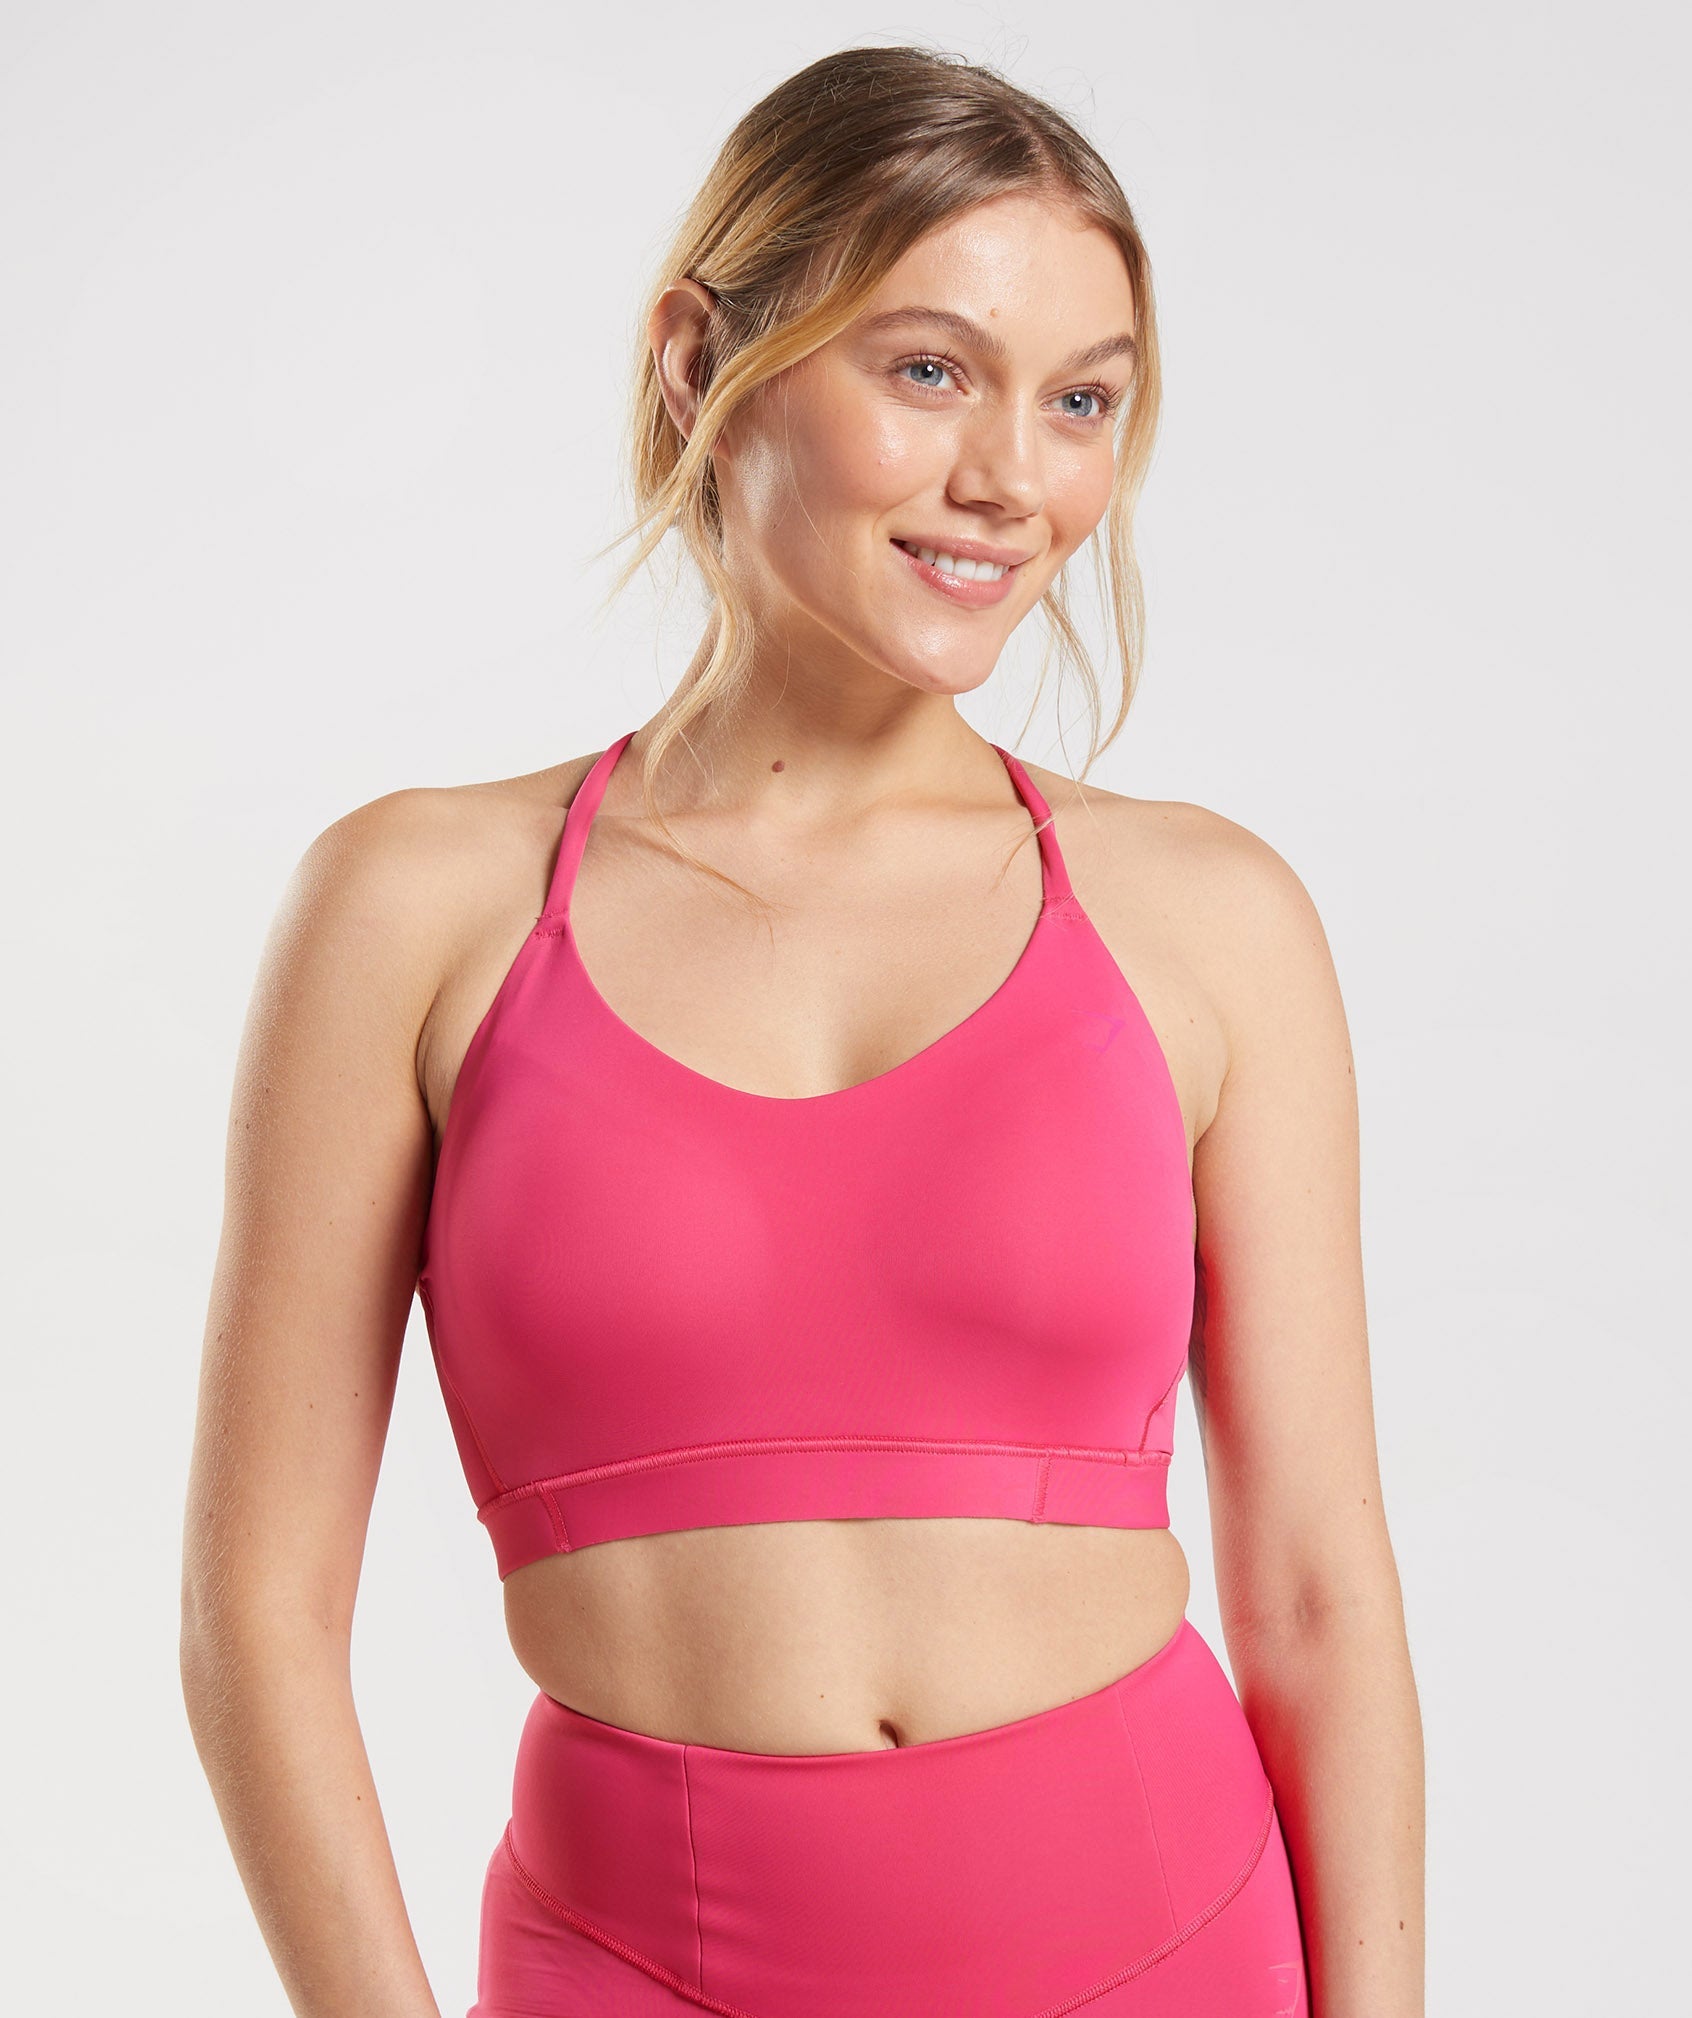  Lfzhjzc Large Size Fixed Sports Bras for Women, Shockproof  Stretch Sports Bra Women, Removable Pads Workout Tank Tops (Color : Pink,  Size : X-Large) : Clothing, Shoes & Jewelry